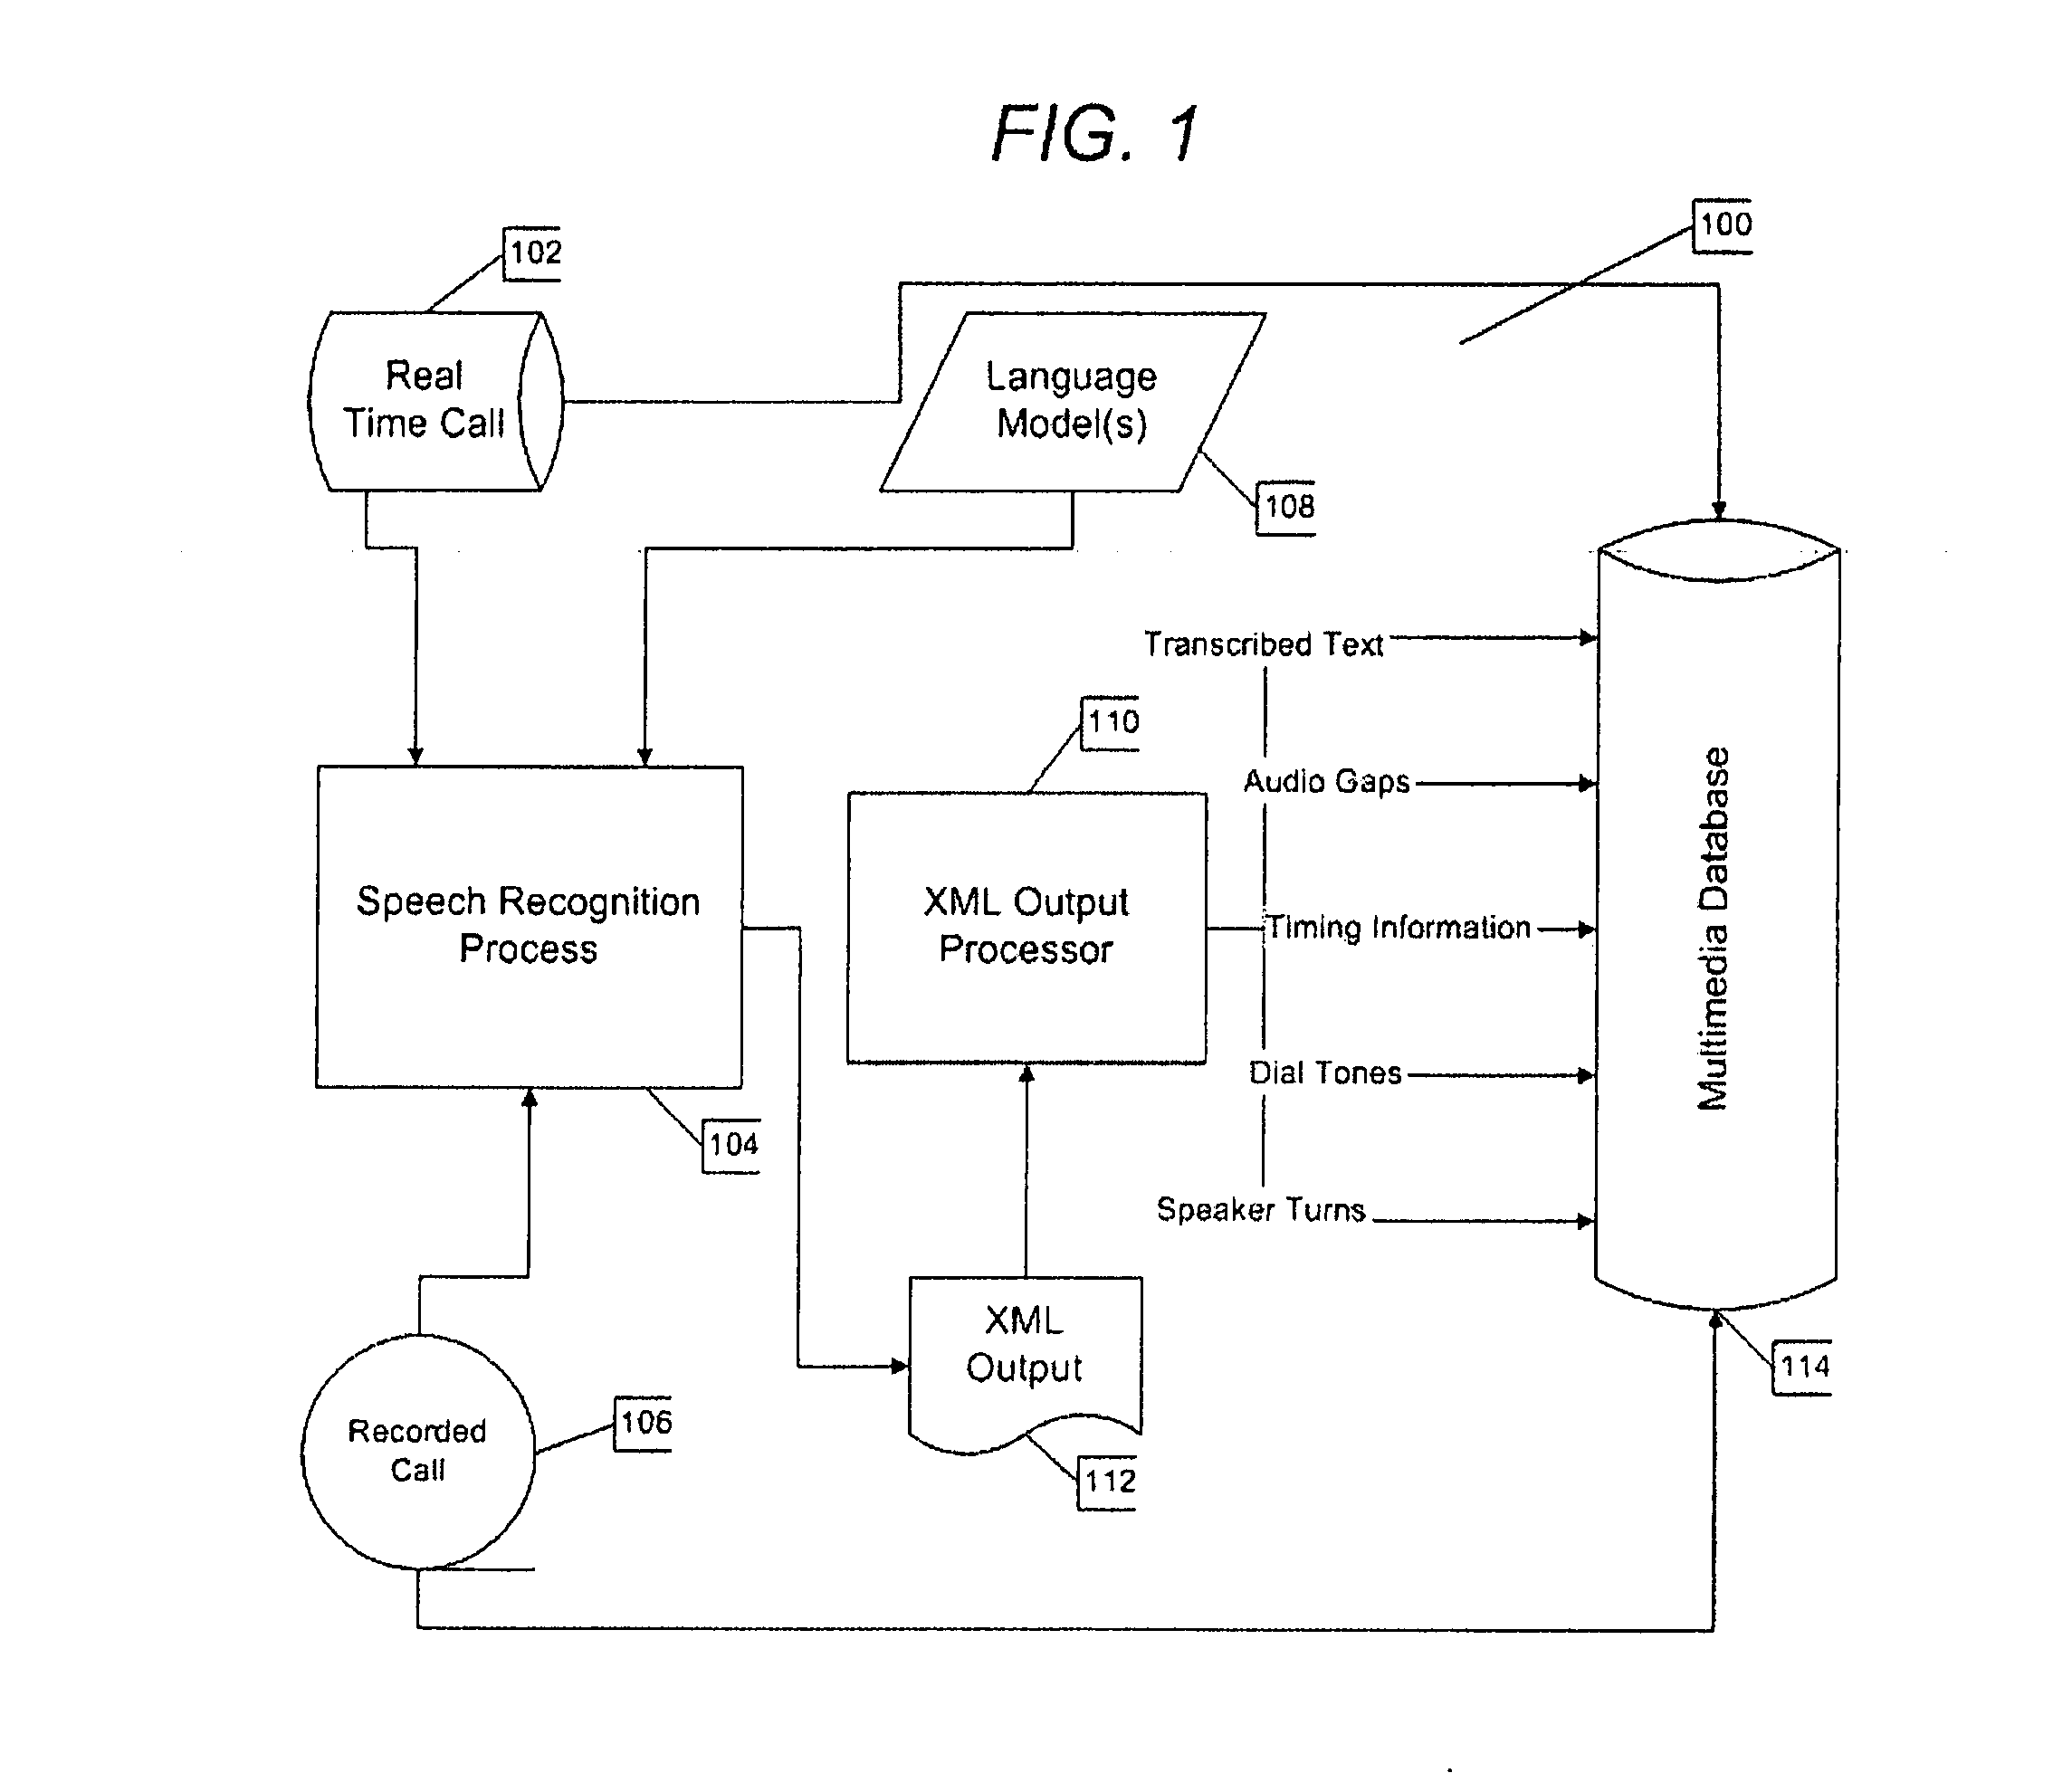 System and method for three-way call detection